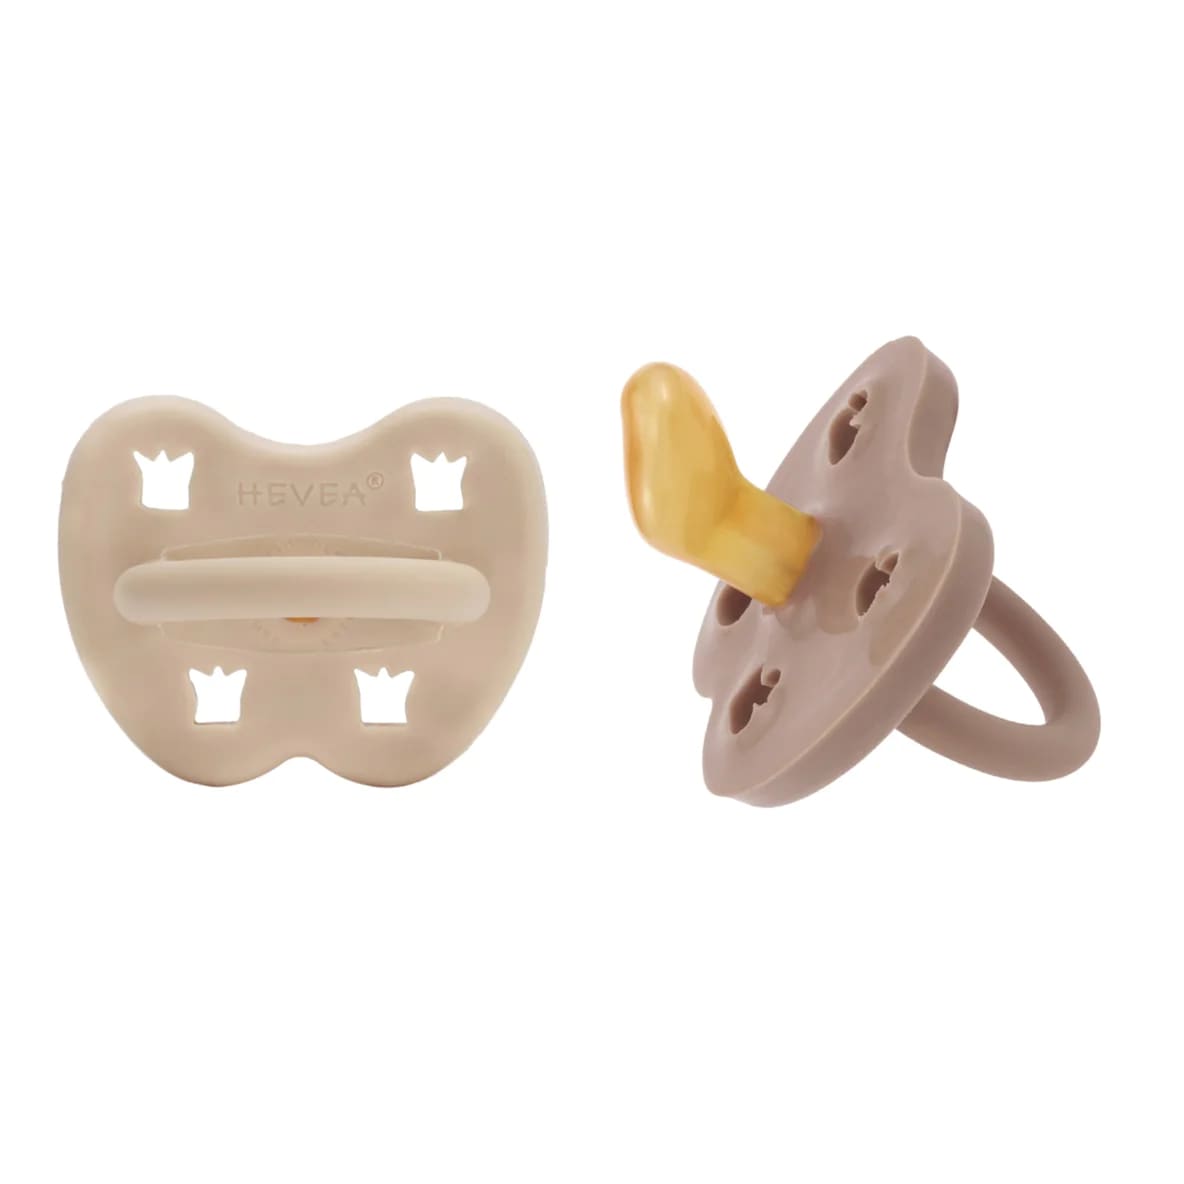 Hevea Natural Rubber Pacifier Orthodontic 3-36 Months Two-pack Sandy & Tan Beige HE-CP-O-2PK-SN-TB-3-36